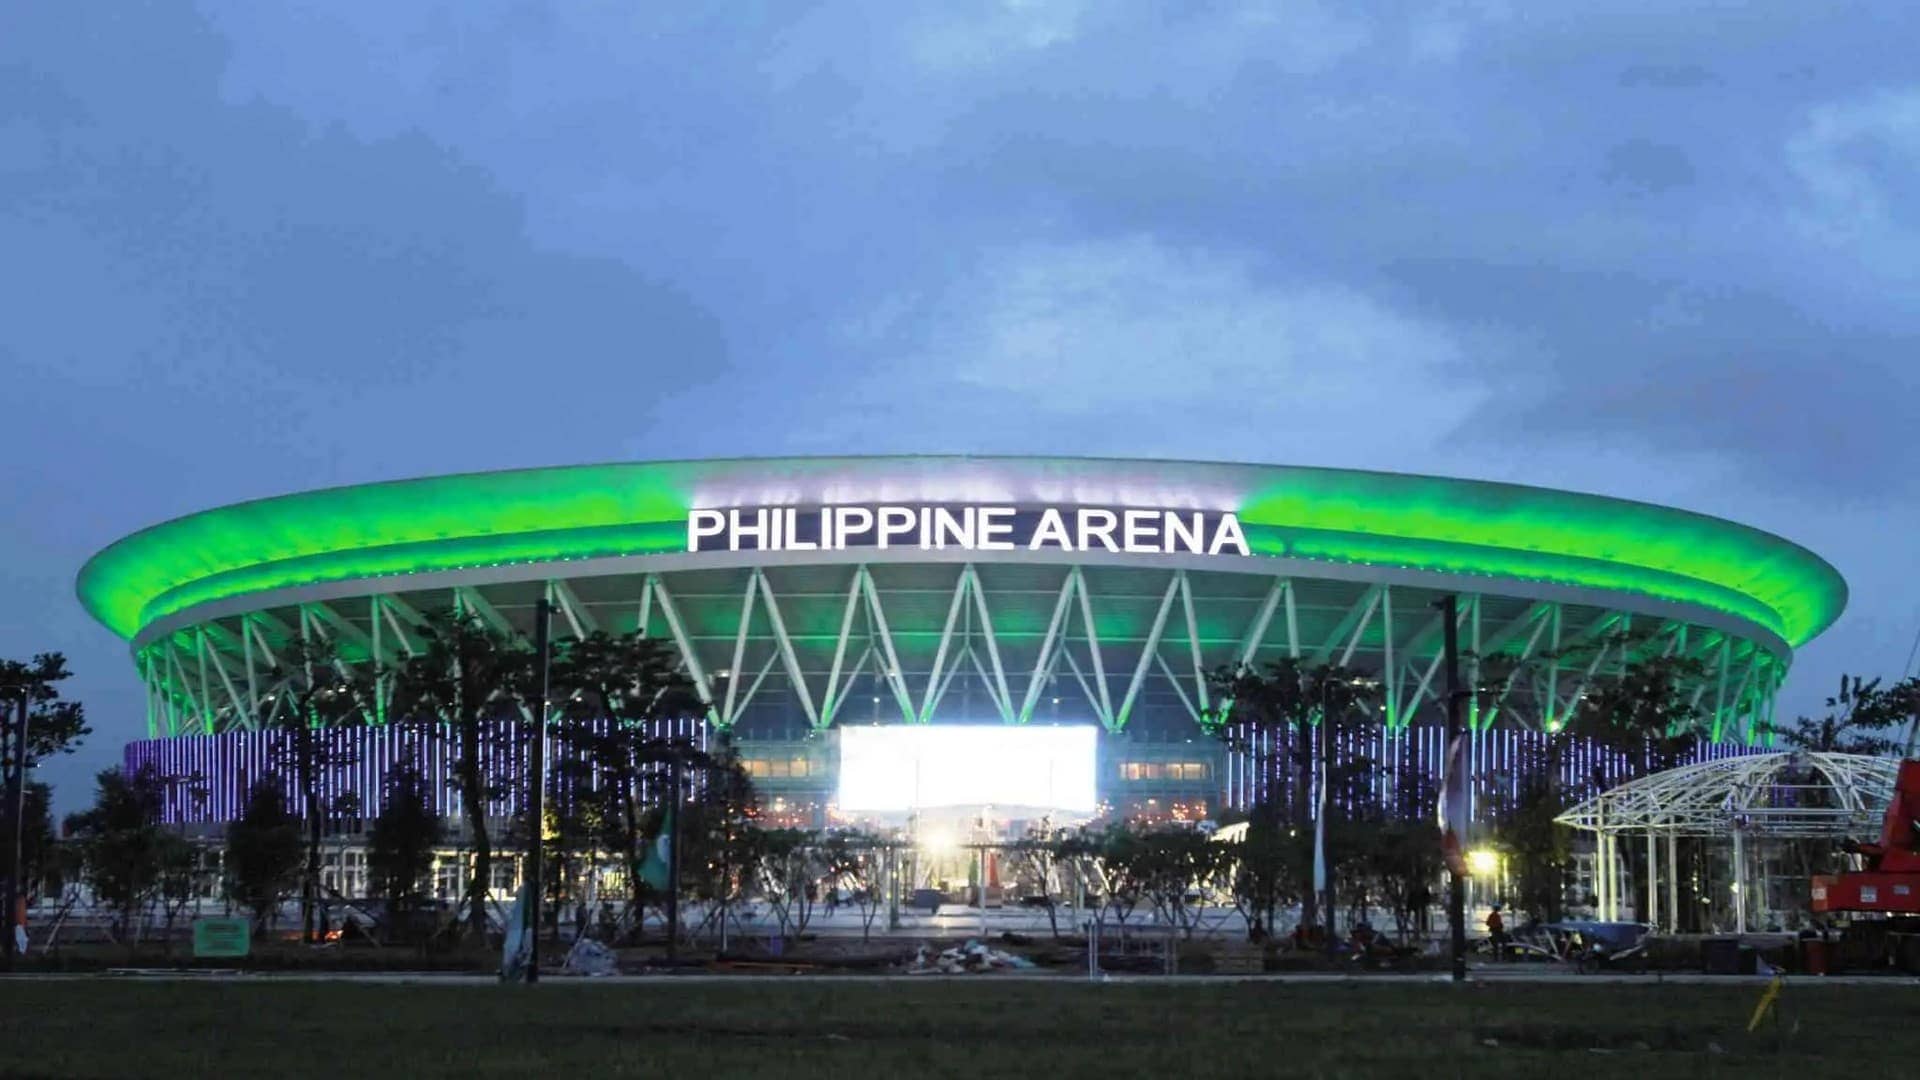 The Philippine Arena - Largest NBA Arena By Capacity In The World Now